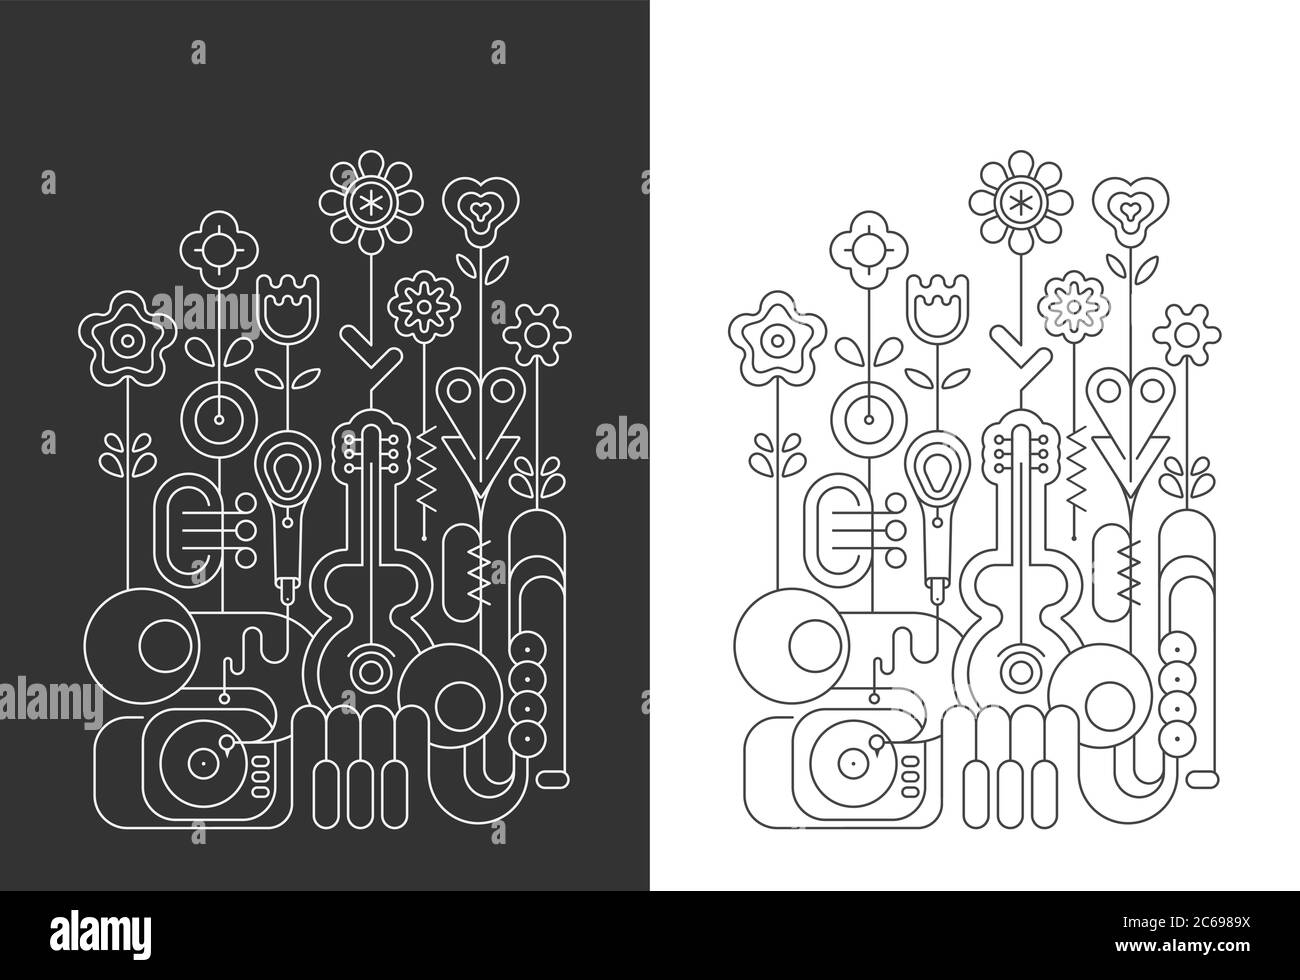 Line art isolated on a dark grey and on a white background Flowers and Music Instruments vector illustrations. Guitar, saxophone, piano keyboard, trum Stock Vector